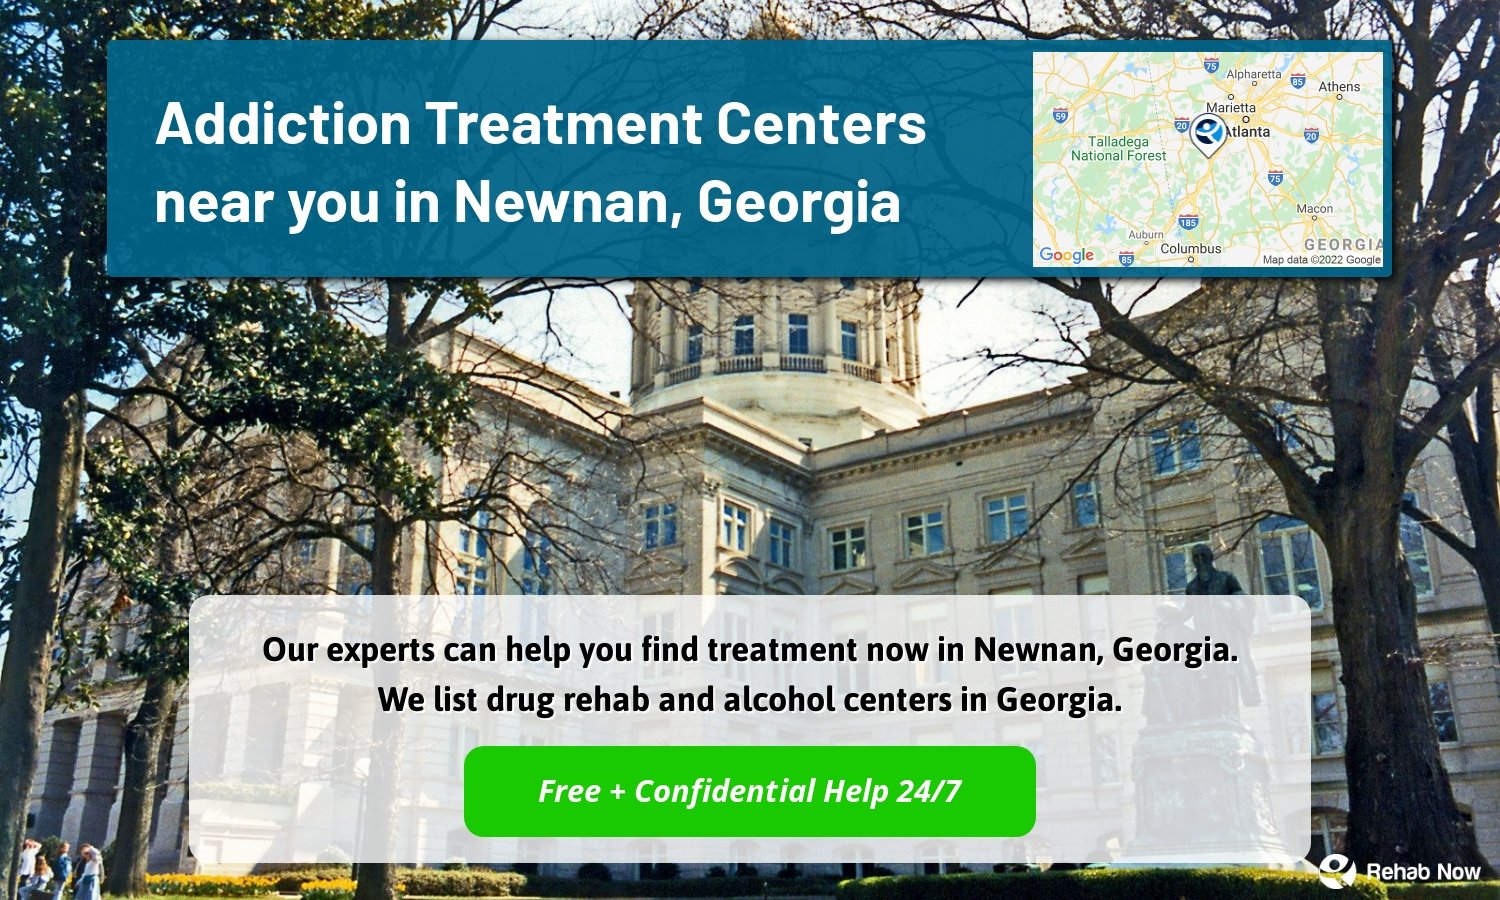 Our experts can help you find treatment now in Newnan, Georgia. We list drug rehab and alcohol centers in Georgia.